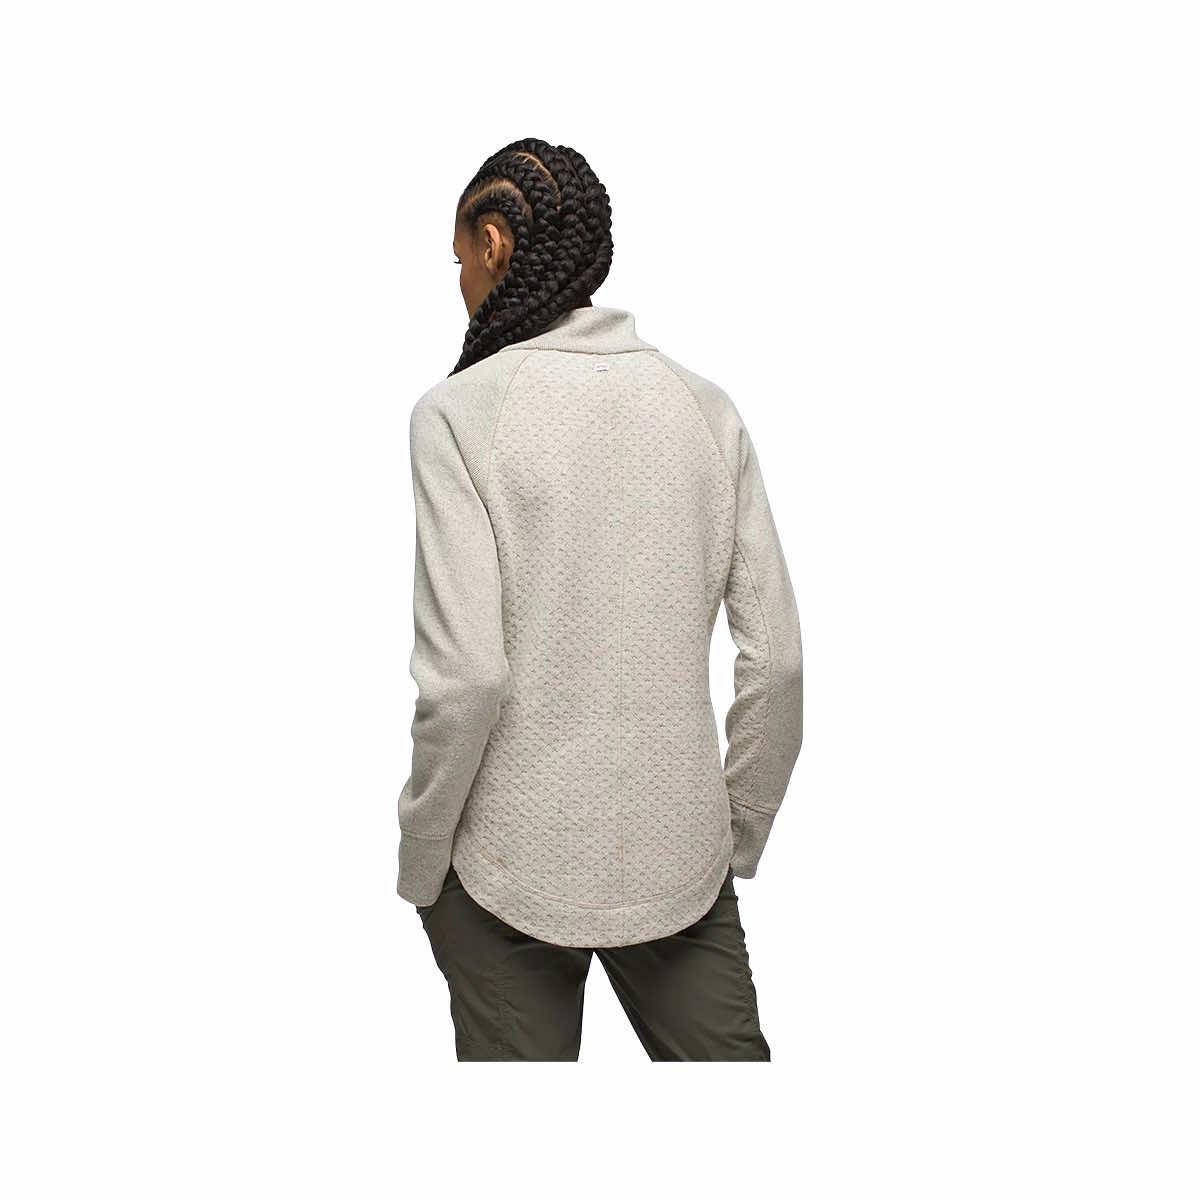 LuLu-B Women's Lightweight Chenille Hoodie, Cabin Time – To The